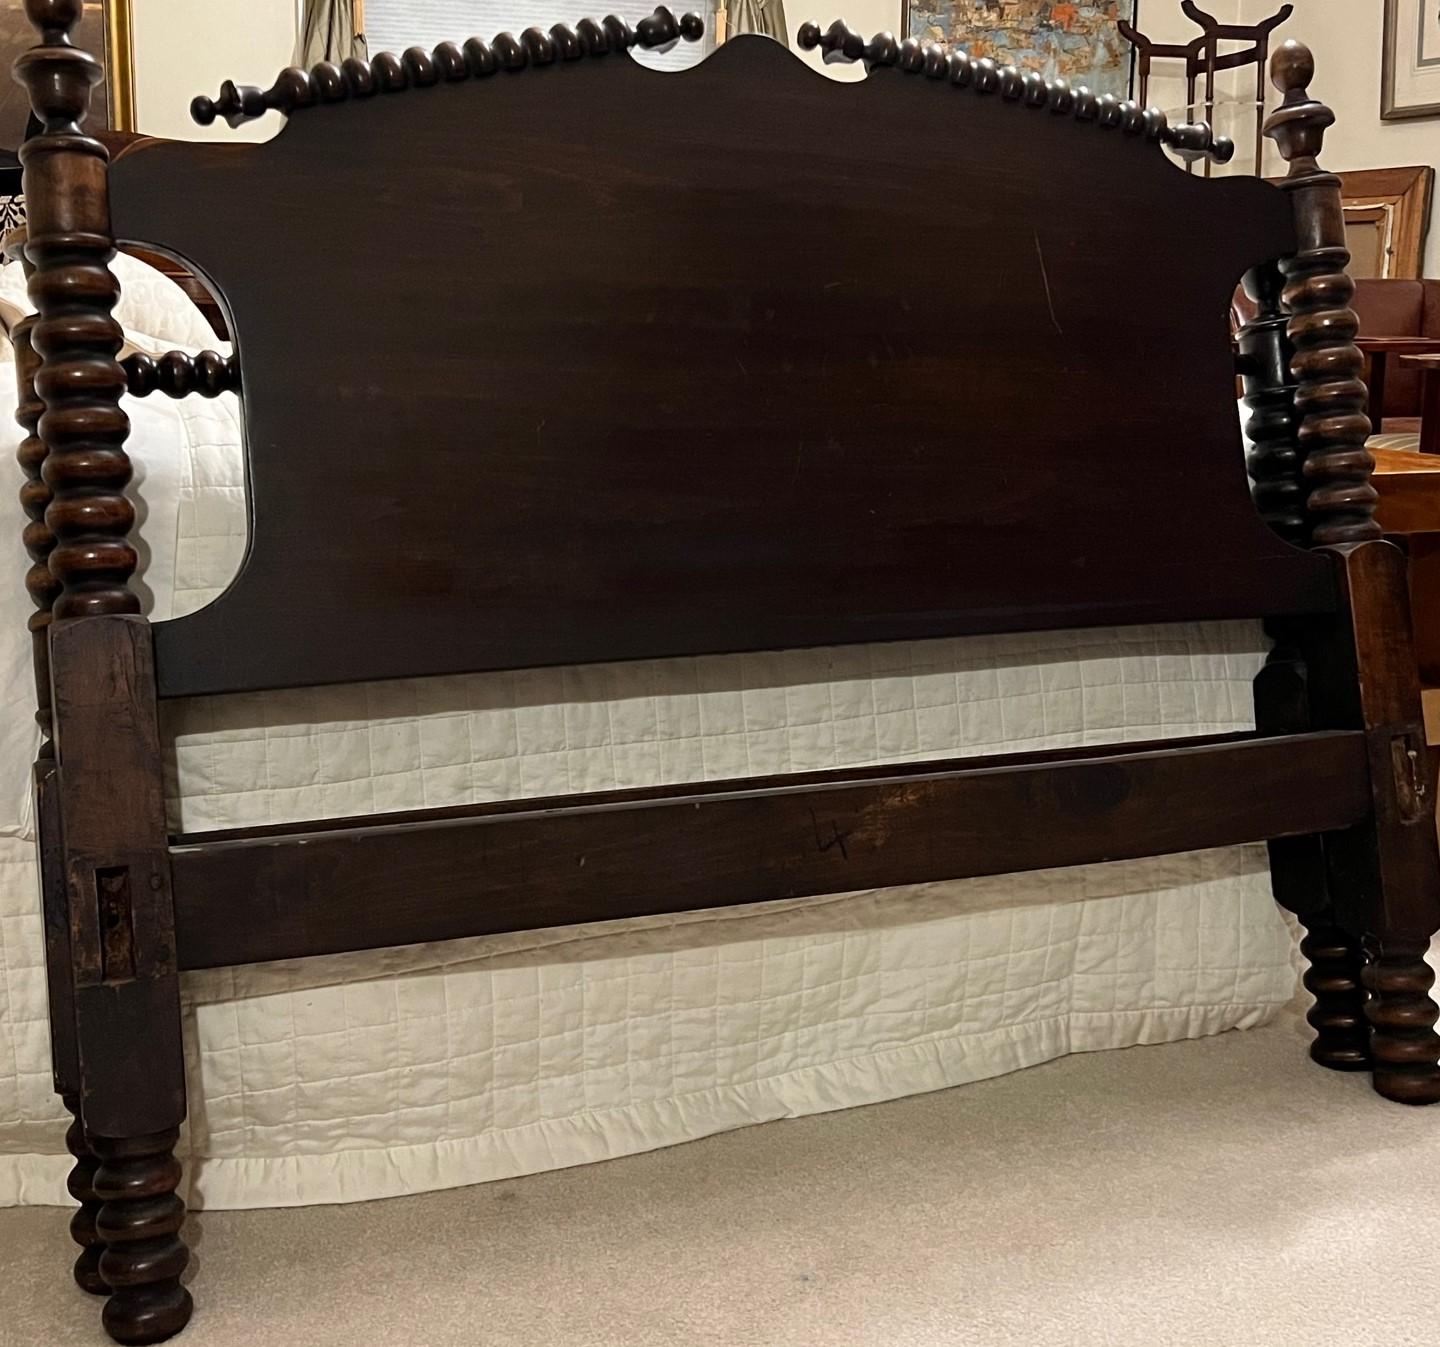 Early 20th C. spool turned Full bed frame in early American style. The wood has a lovely patina and a rich chocolate brown color. The headboard
spool-shaped turnings in the spindles and usually in the rails and posts of the headboard and